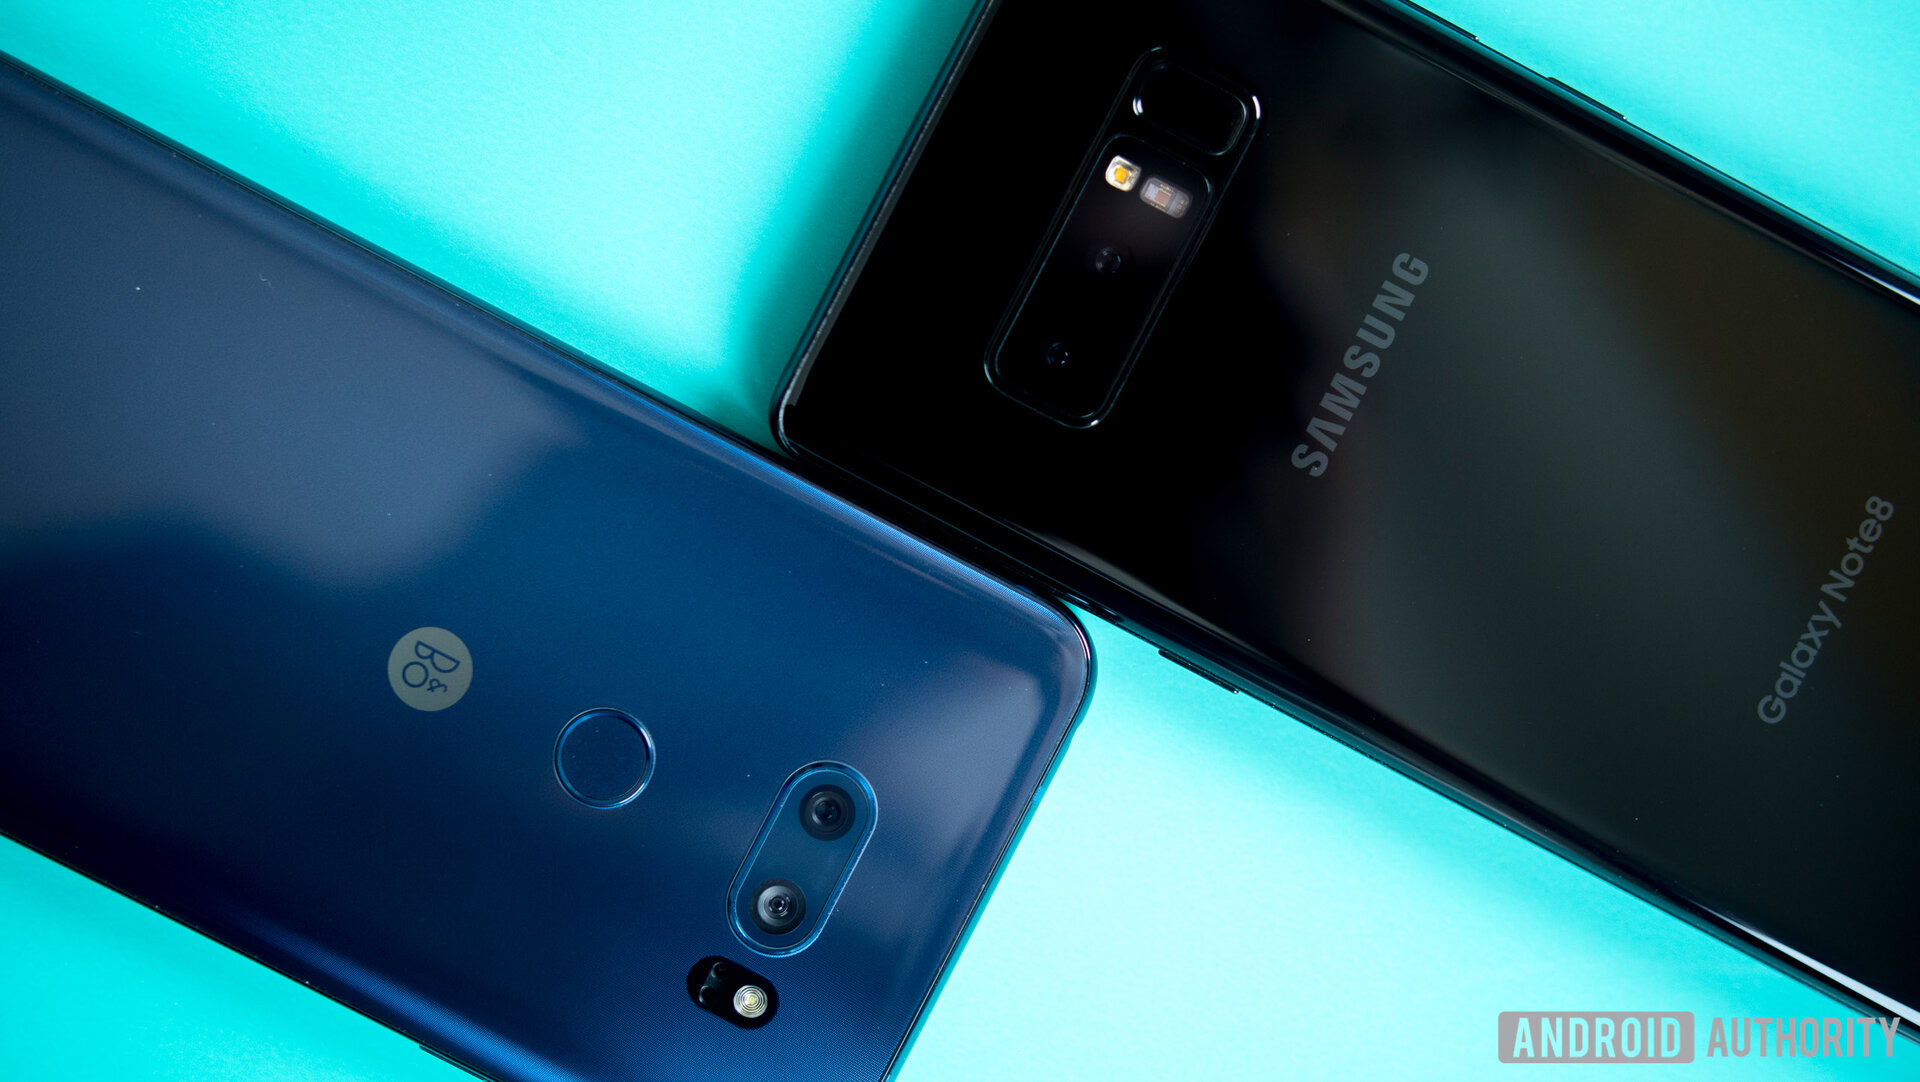 The LG V30 and Galaxy Note 8 smartphones, face-down on a turquoise surface.